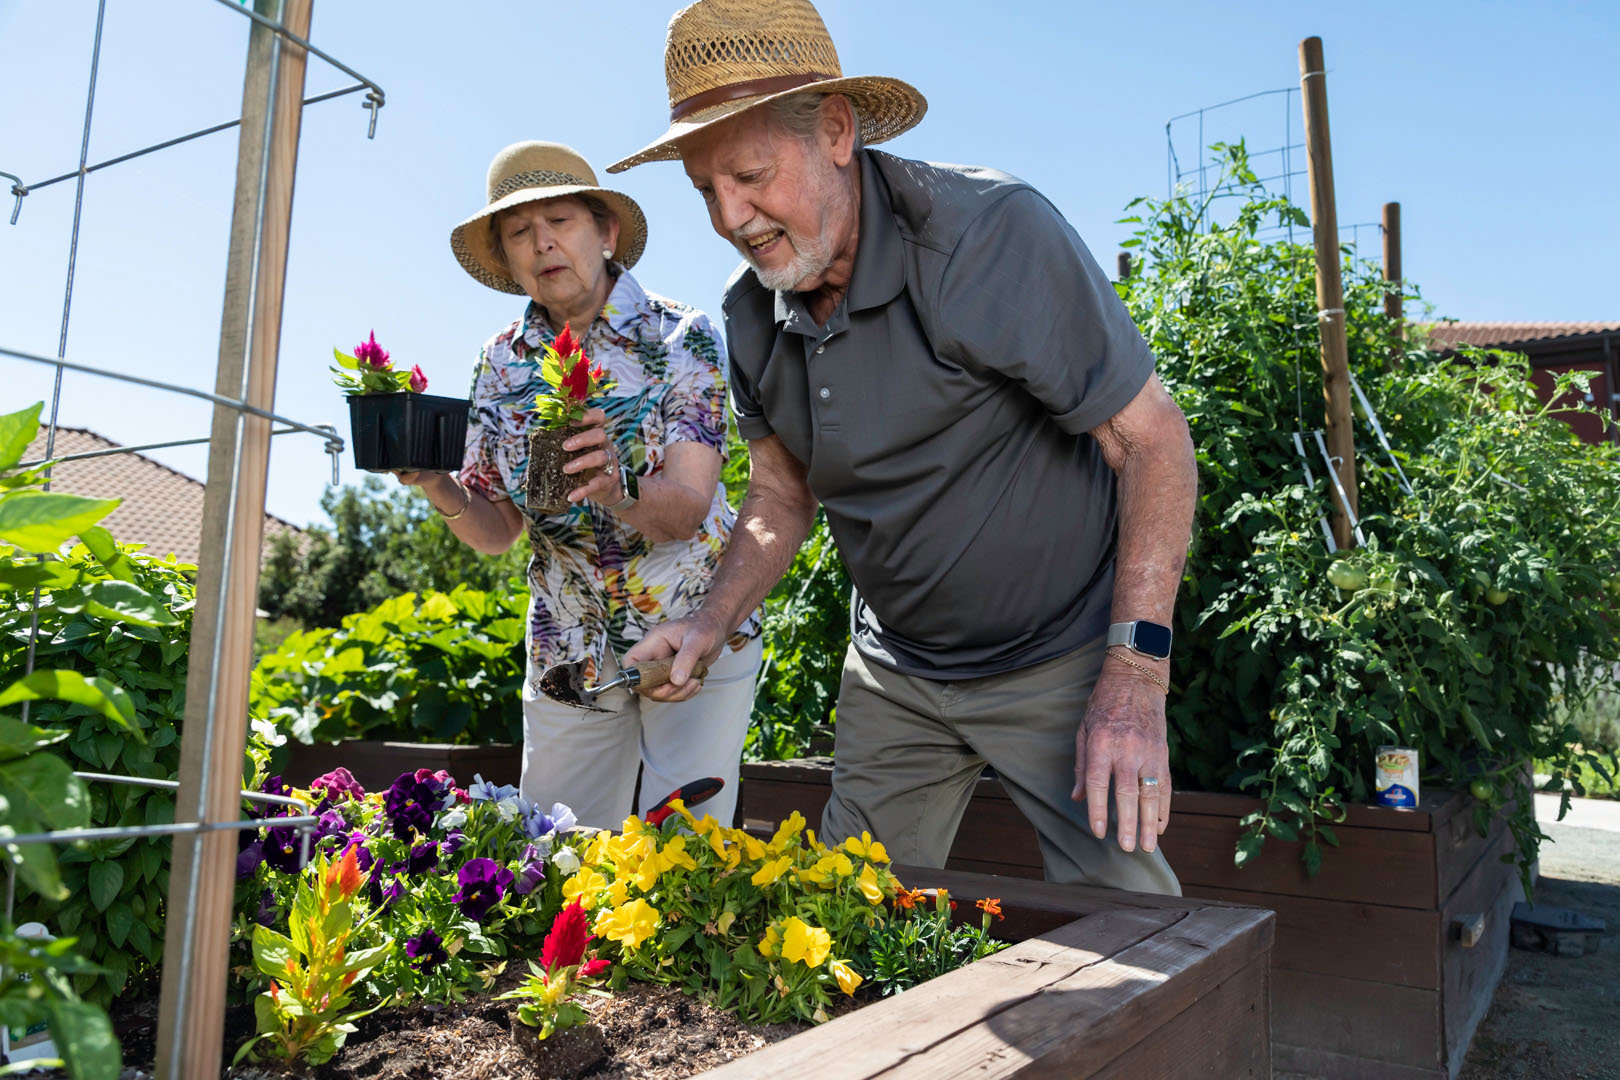 A senior man and woman wearing sun hats and gardening